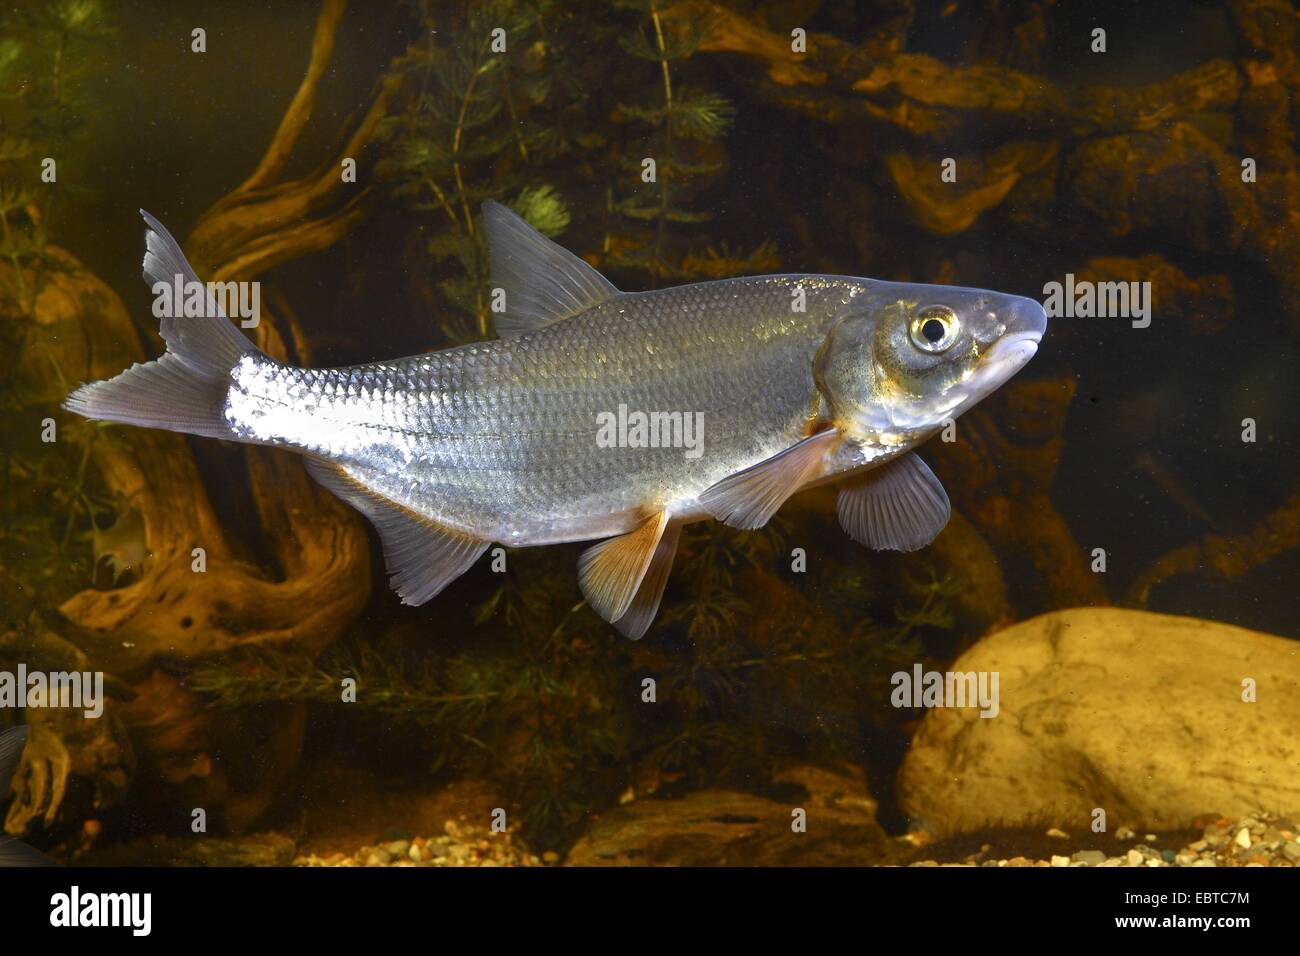 East European bream, zaehrte, Baltic vimba, Vimba bream, Vimba, Zanthe, Zarte (Vimba vimba, Abramis vimba), swimming at the bottom of a river covered with stones and waterplants Stock Photo